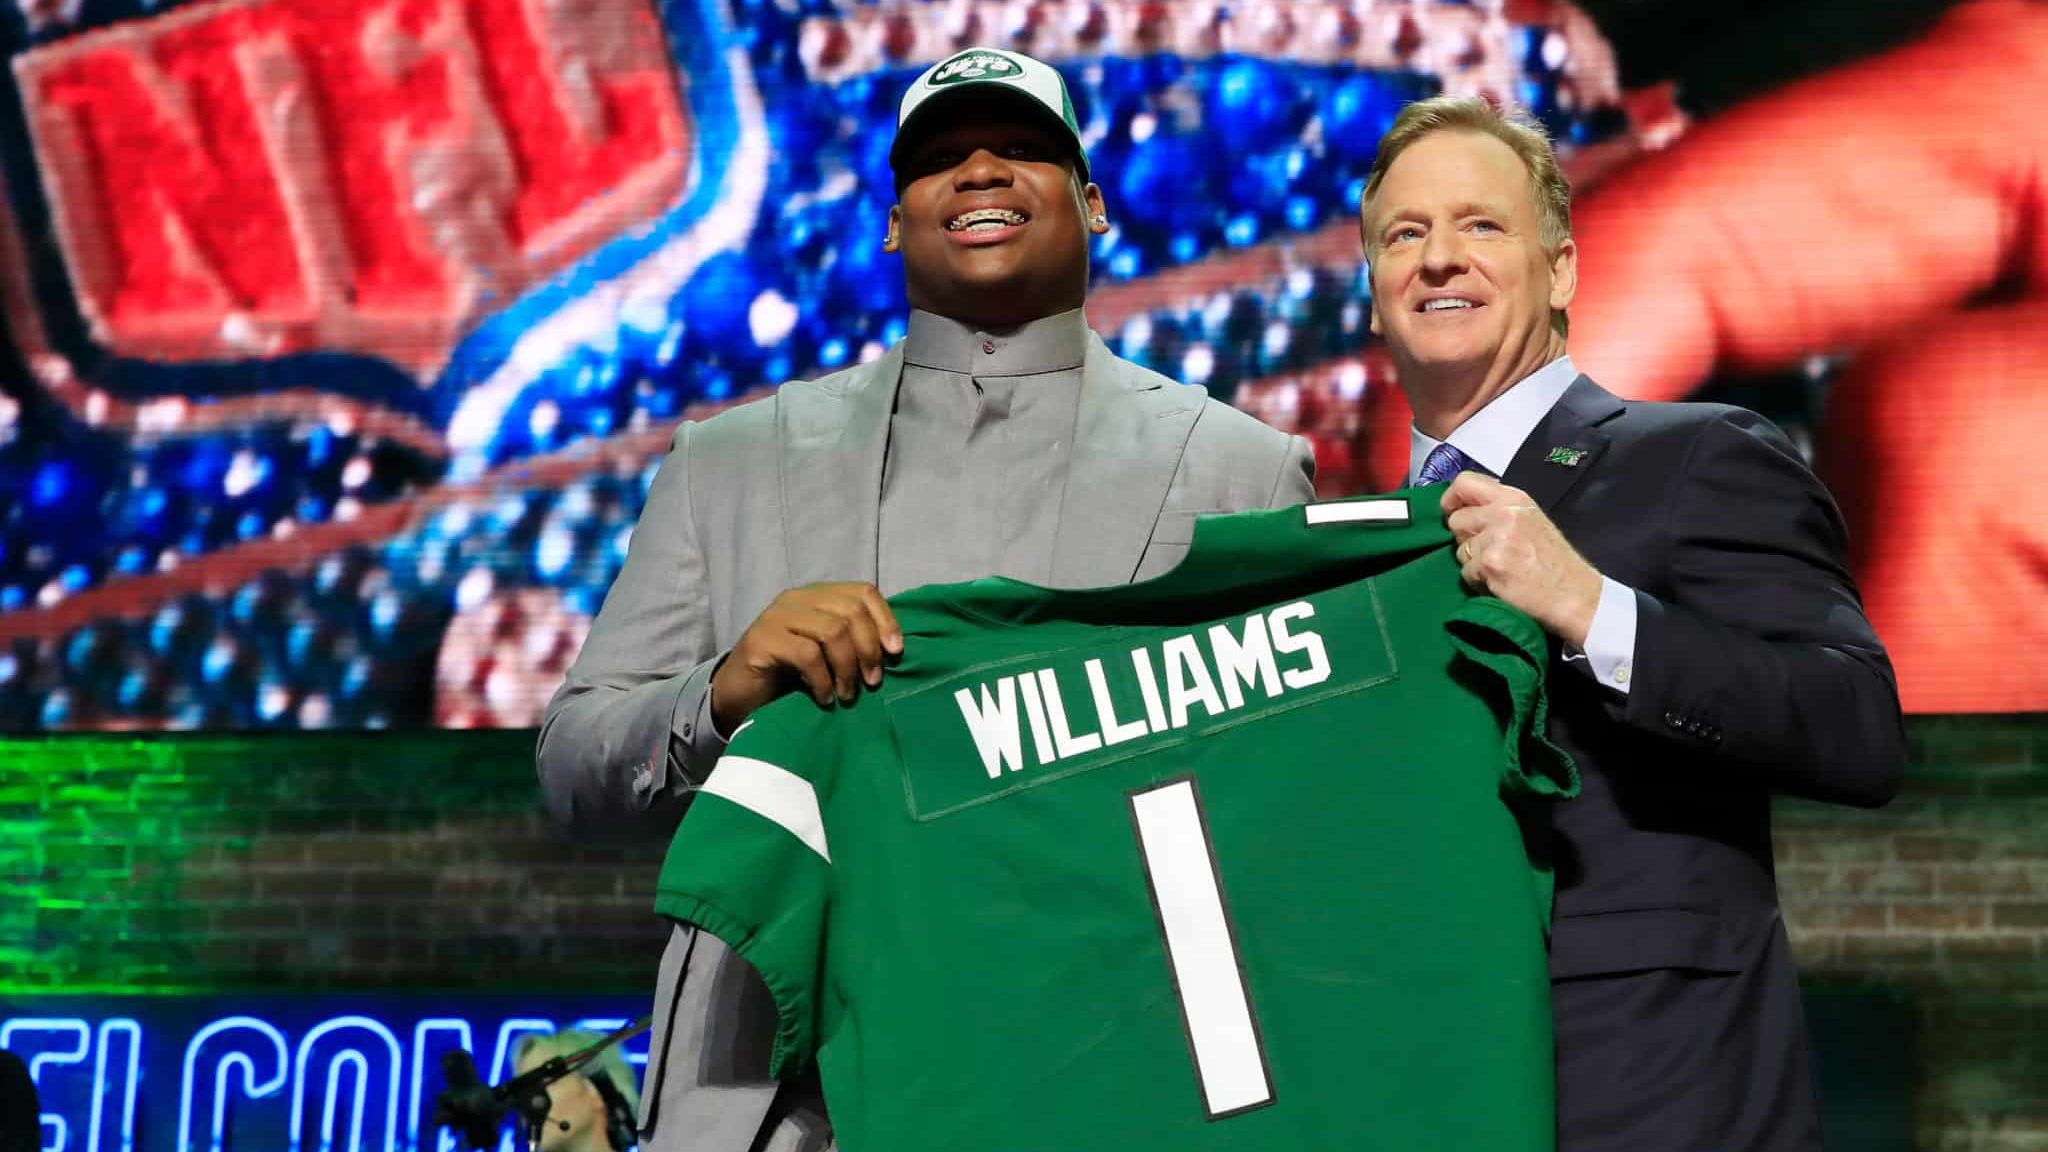 NASHVILLE, TENNESSEE - APRIL 25: Quinnen Williams of Alabama poses with NFL Commissioner Roger Goodell after he was picked #3 overall by the New York Jets during the first round of the 2019 NFL Draft on April 25, 2019 in Nashville, Tennessee.